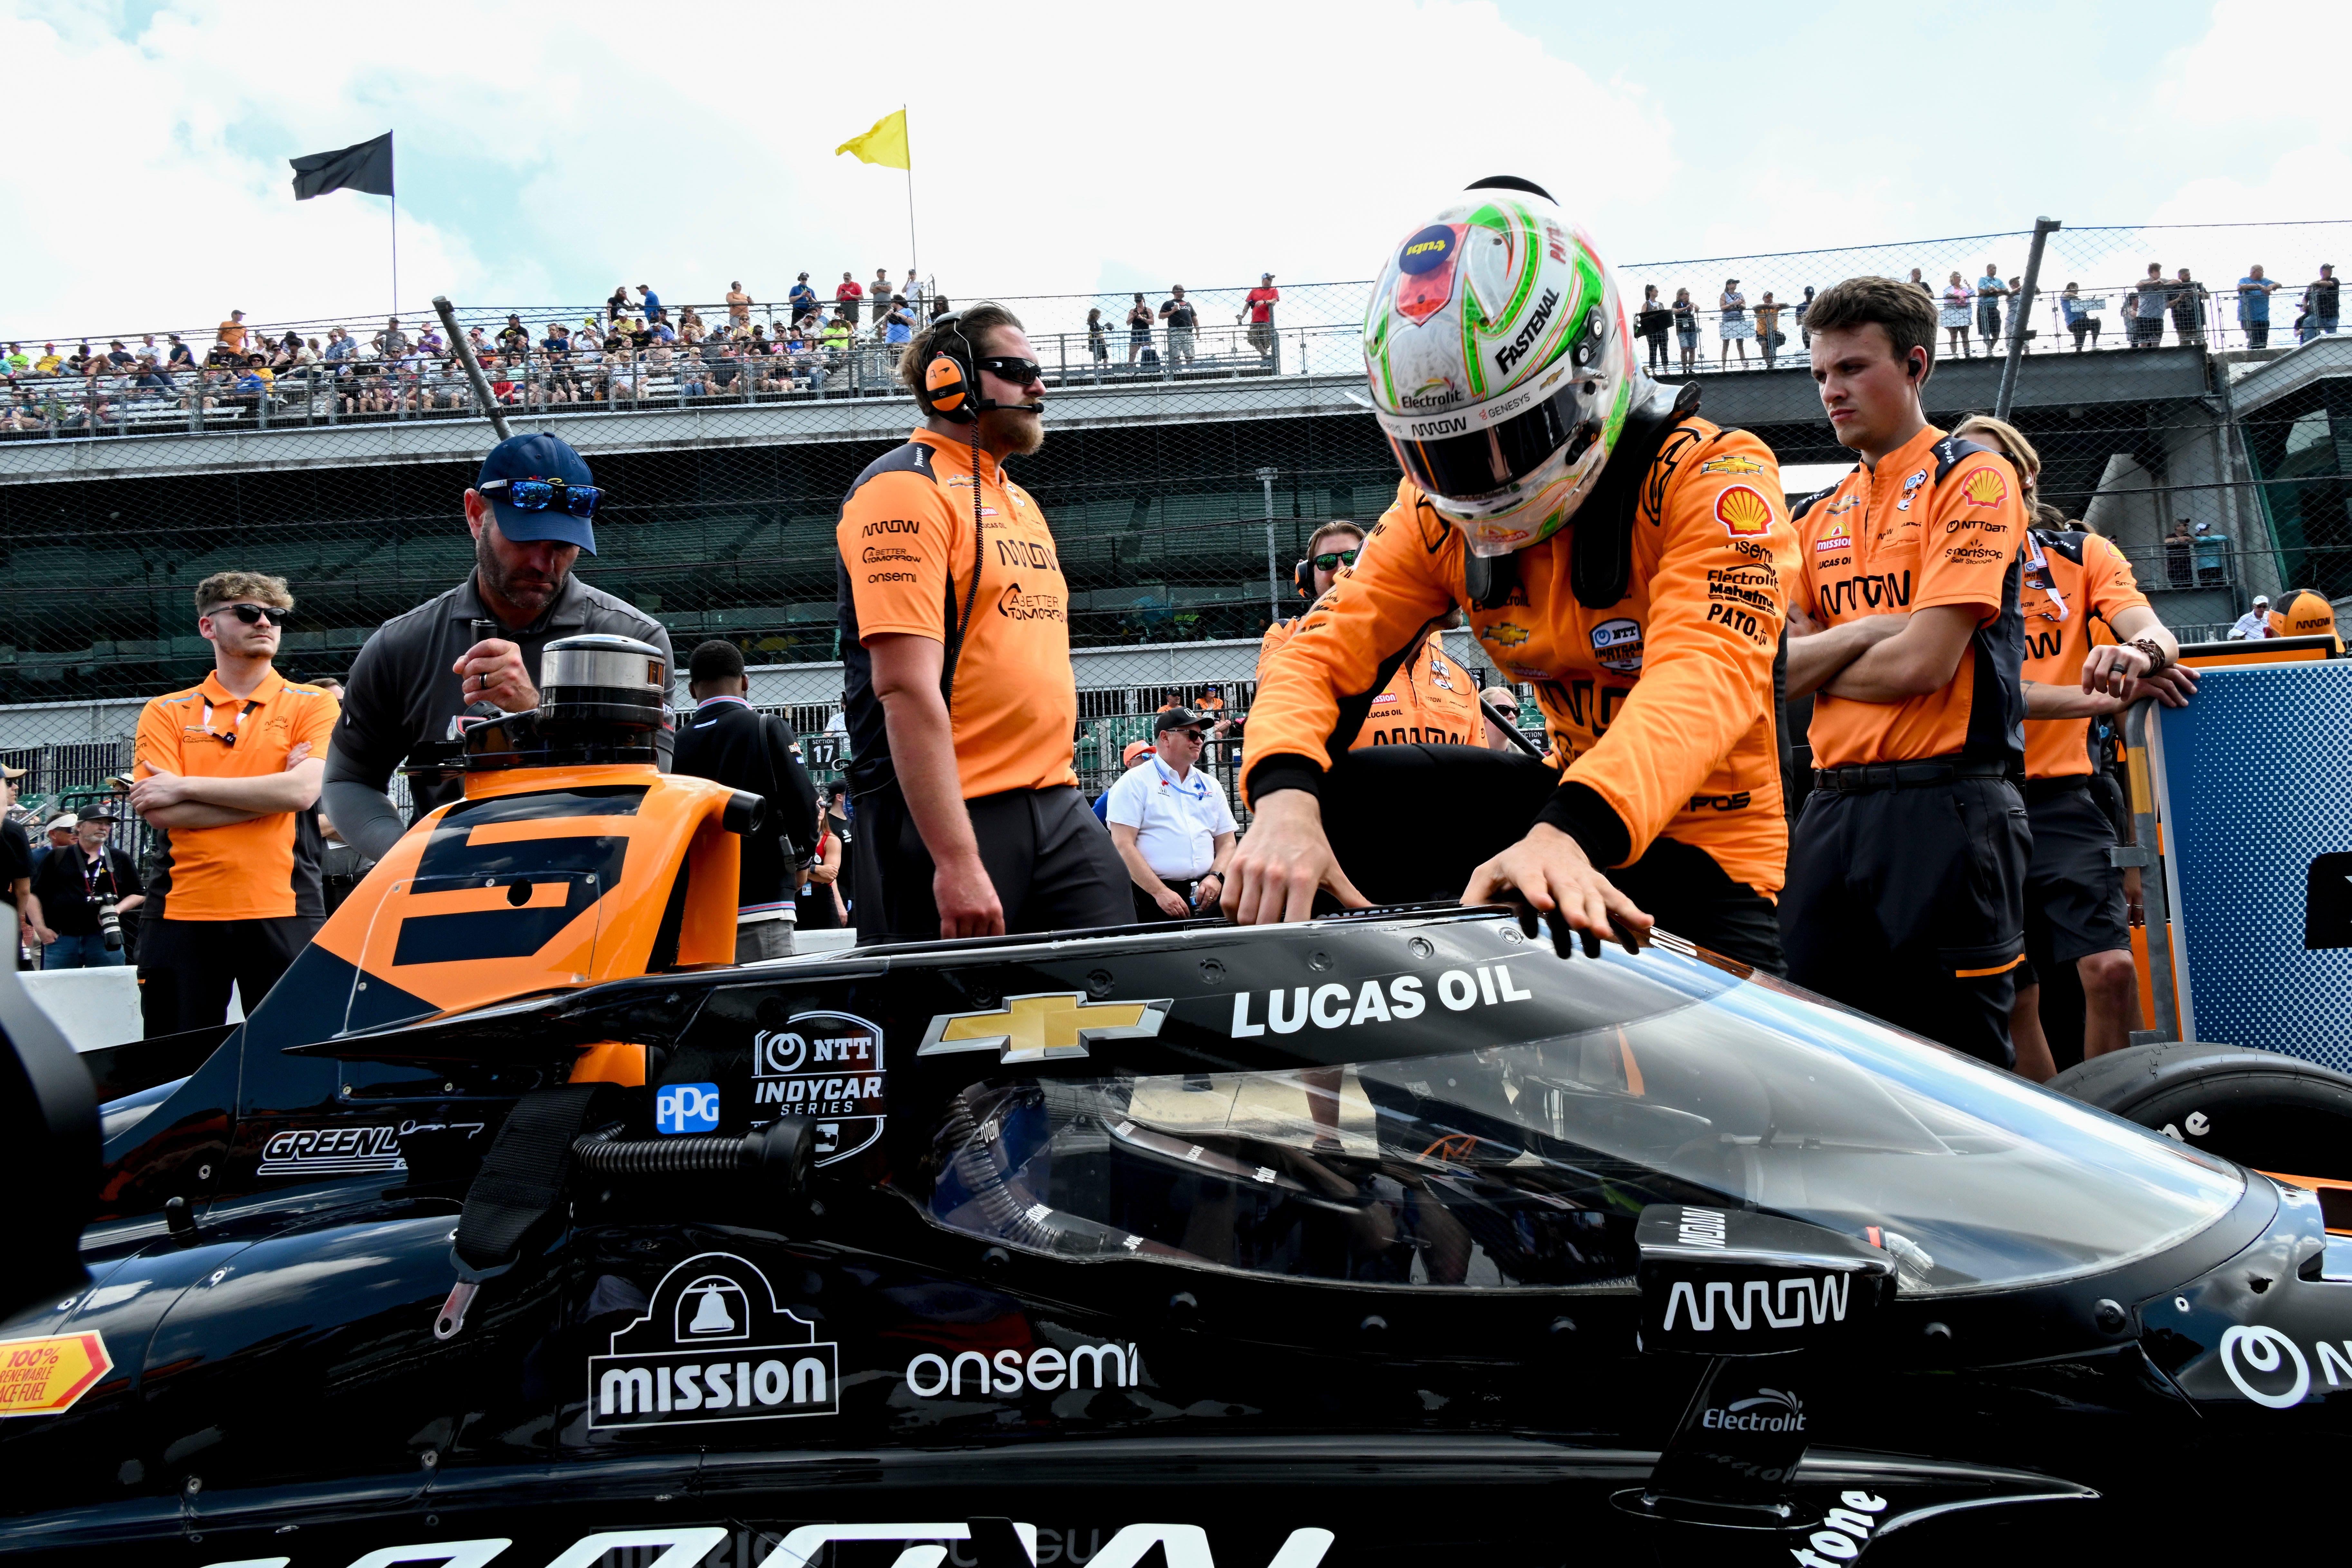 Who is Pato O'Ward? Get to know Arrow McLaren driver set for Indy 500 race at IMS